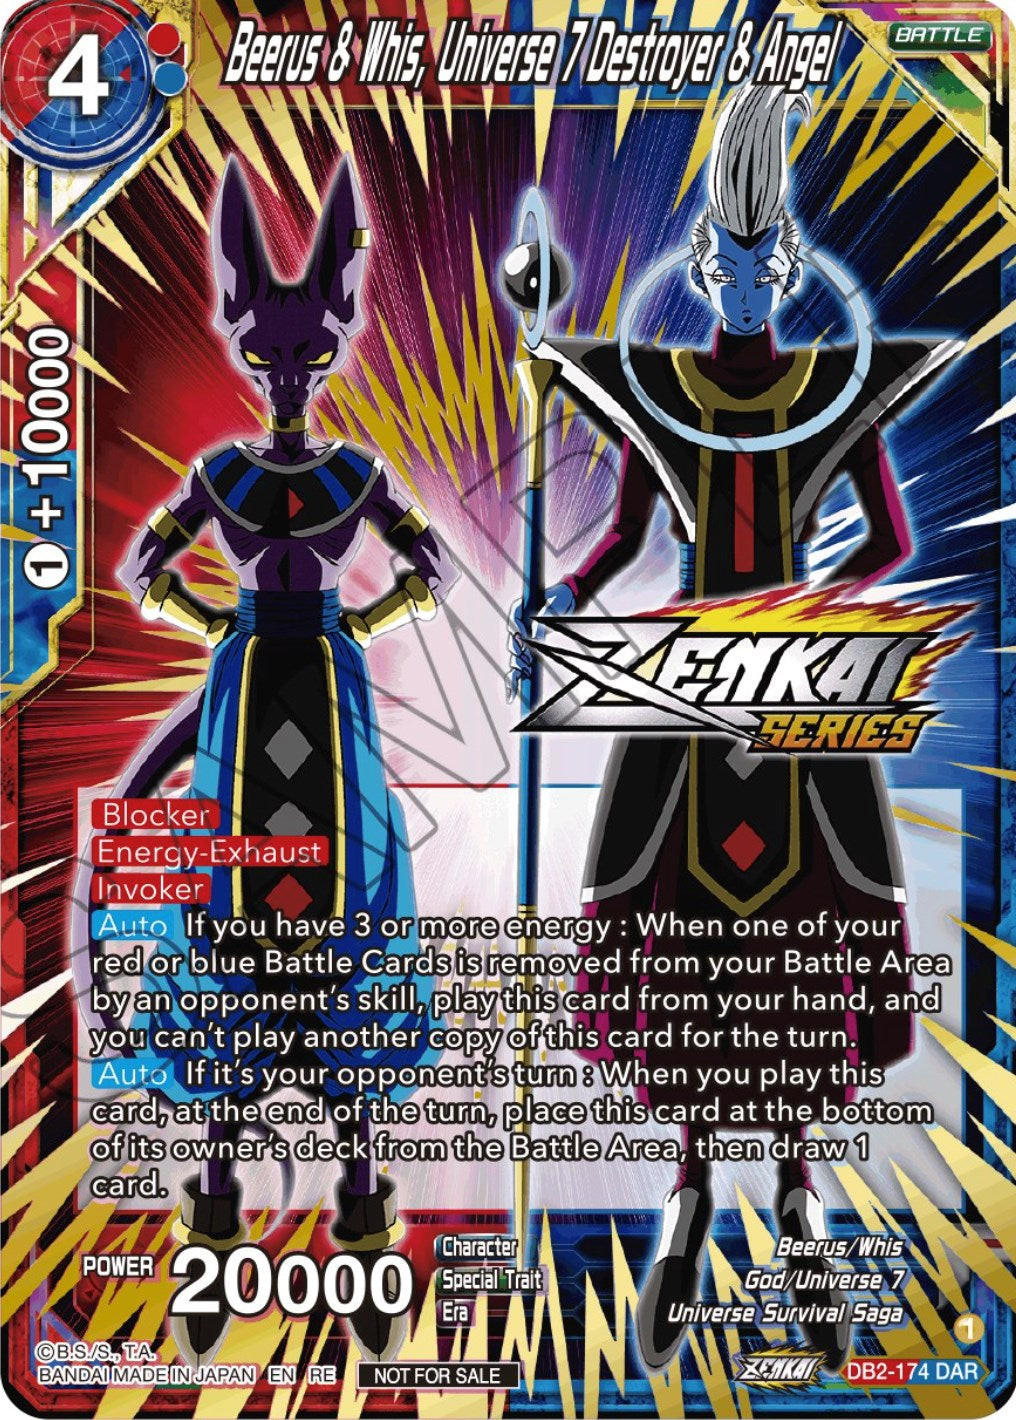 Beerus & Whis, Universe 7 Destroyer & Angel (Event Pack 12) (DB2-174) [Tournament Promotion Cards] | Black Swamp Games